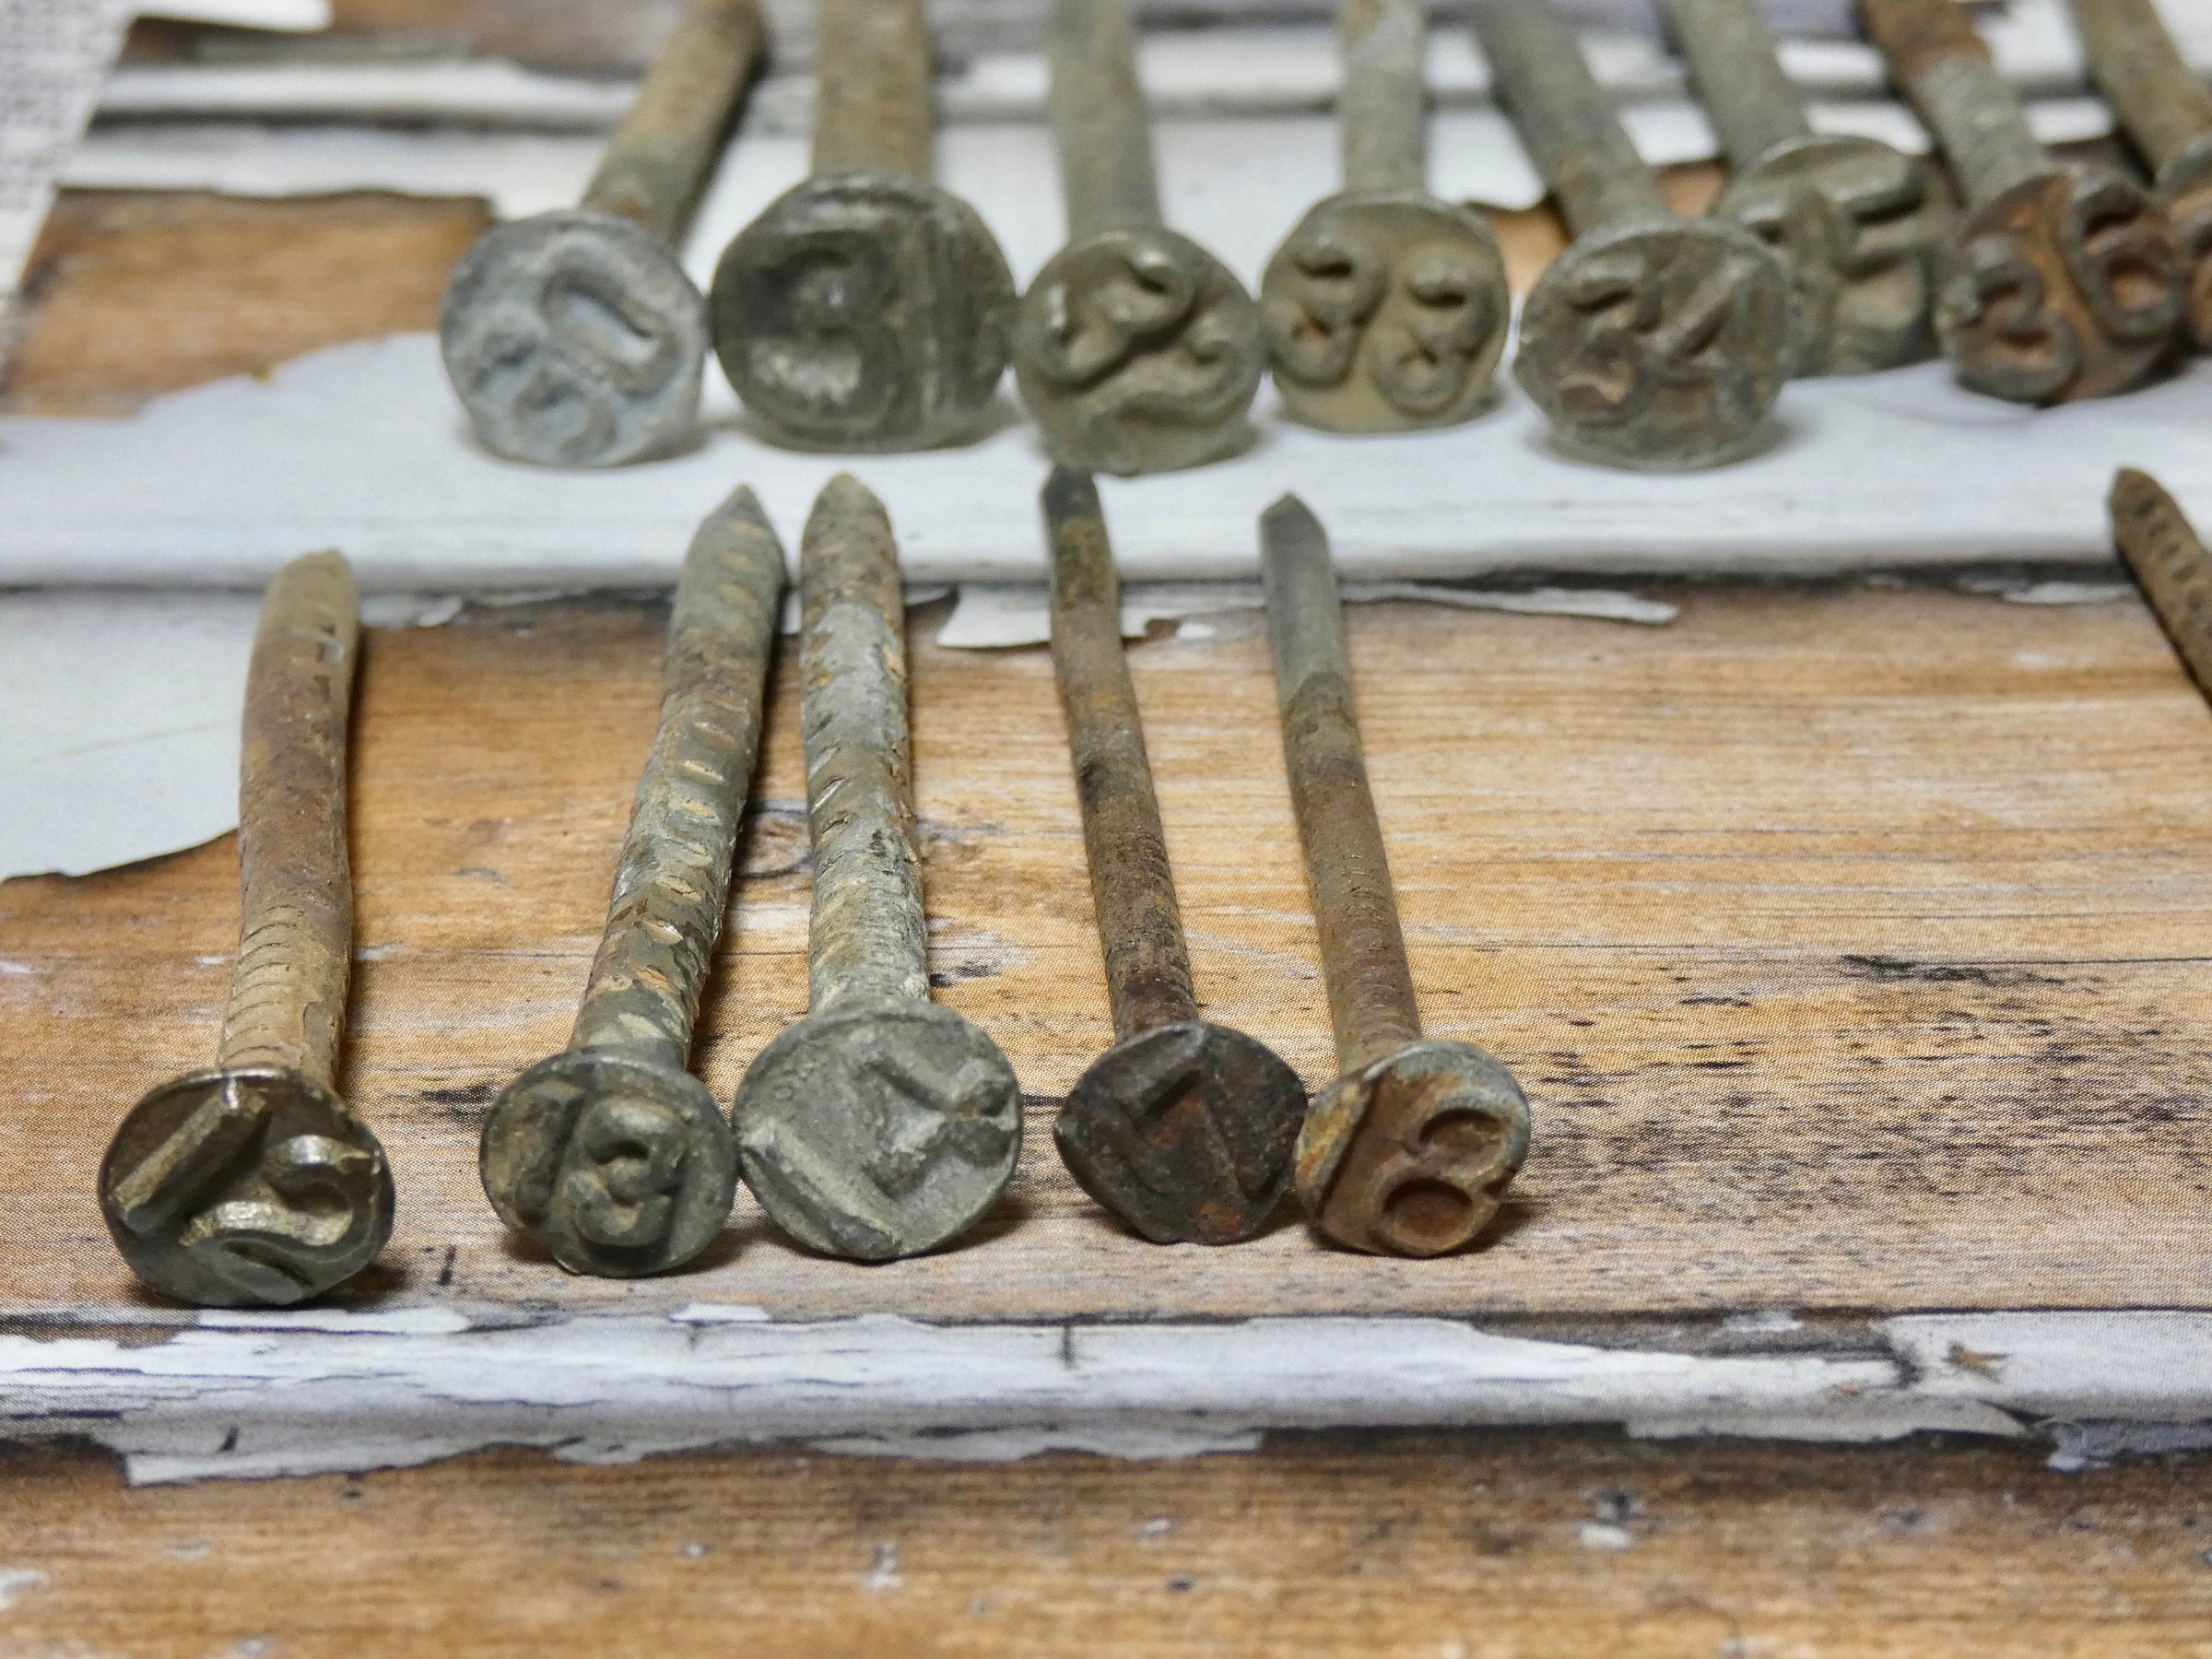 Railroad Date Nails 1912 to 1942 Years available, Rusty architectural salvage steampunk jewelry hardware art